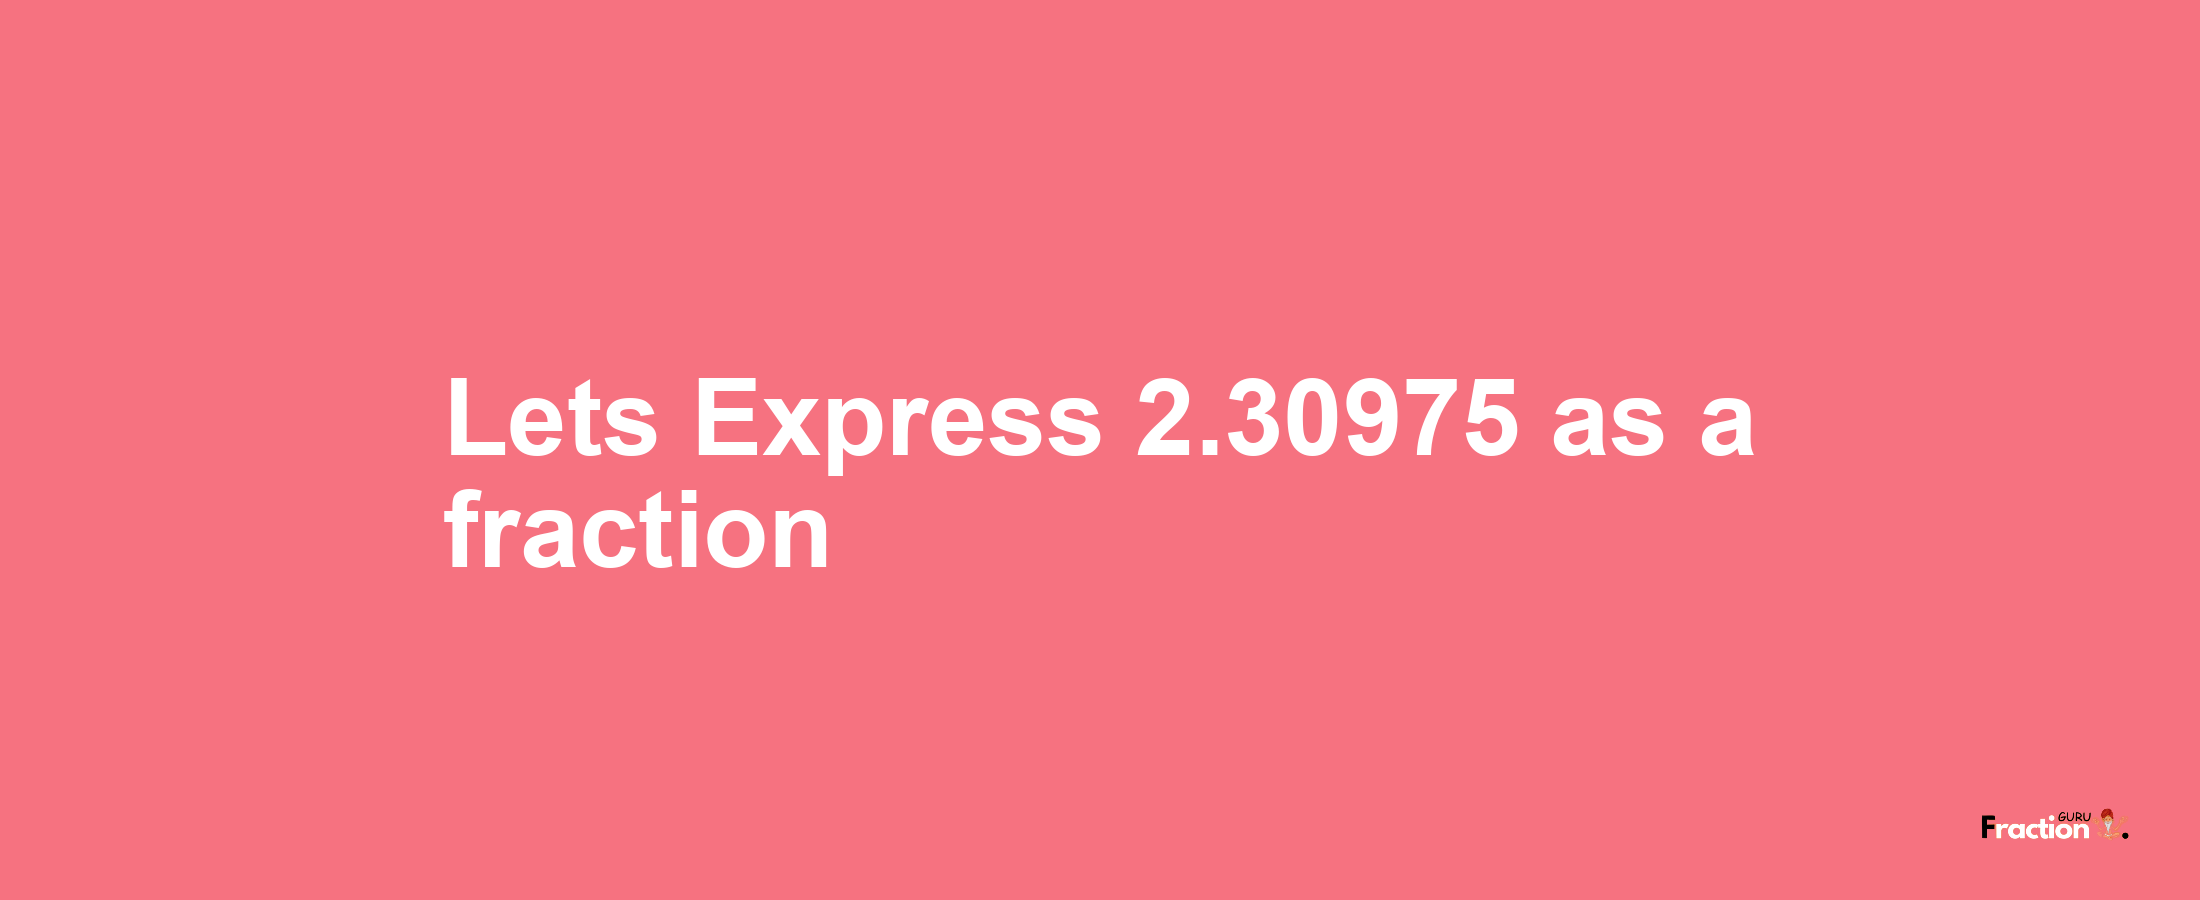 Lets Express 2.30975 as afraction